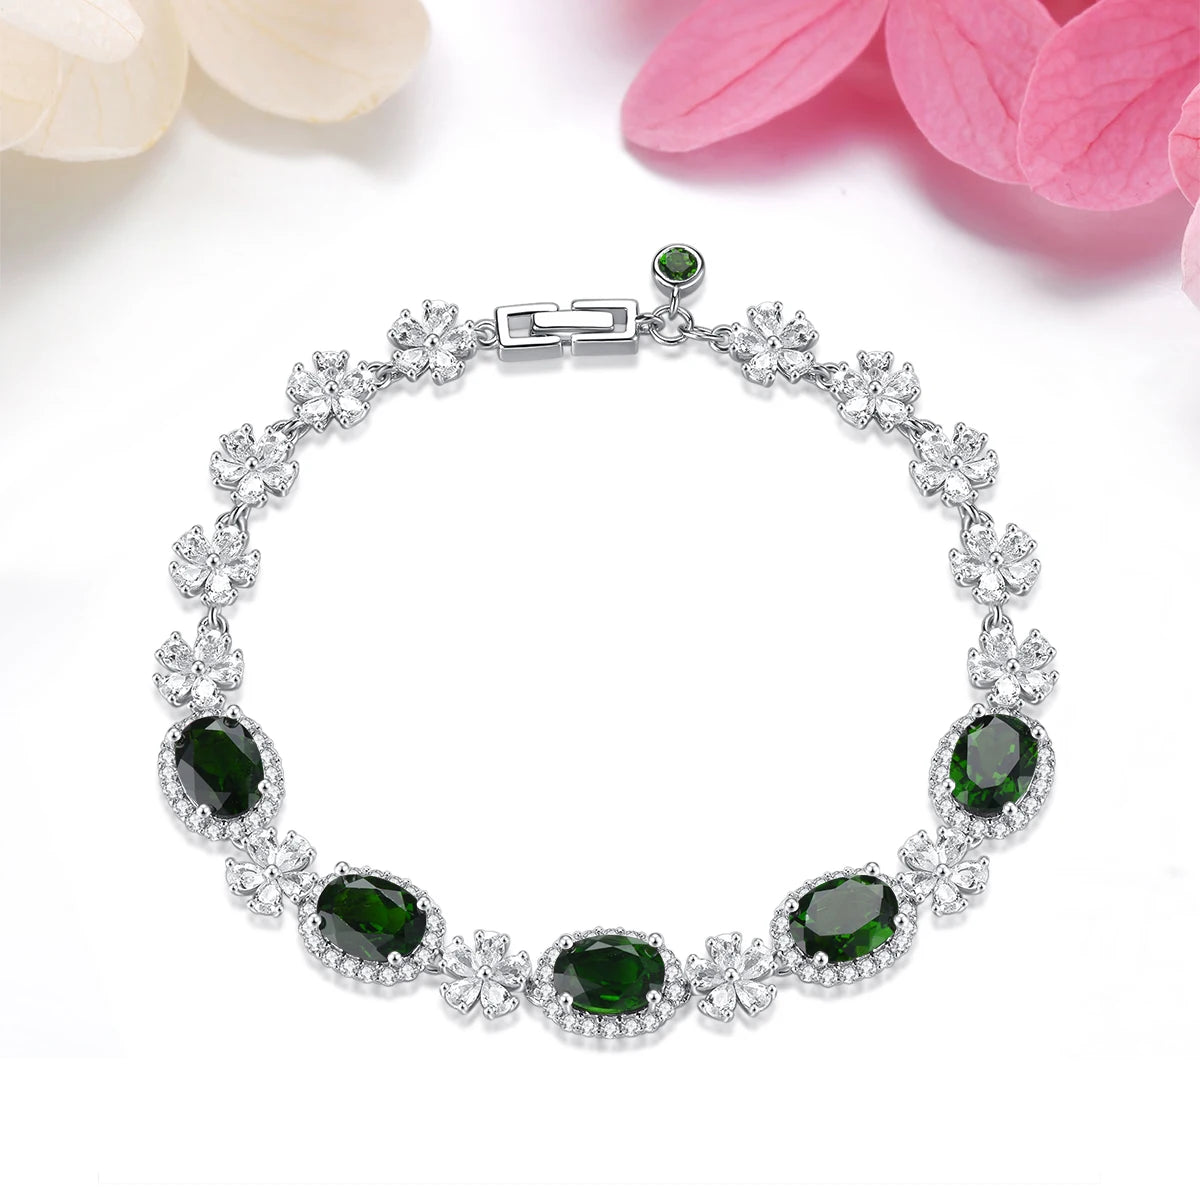 Natural Chrome Diopside Sterling Silver Bracelets 6.8 Carats Genuine Gemstone Classic Romantic Daily Style Women's Fine Jewelrys